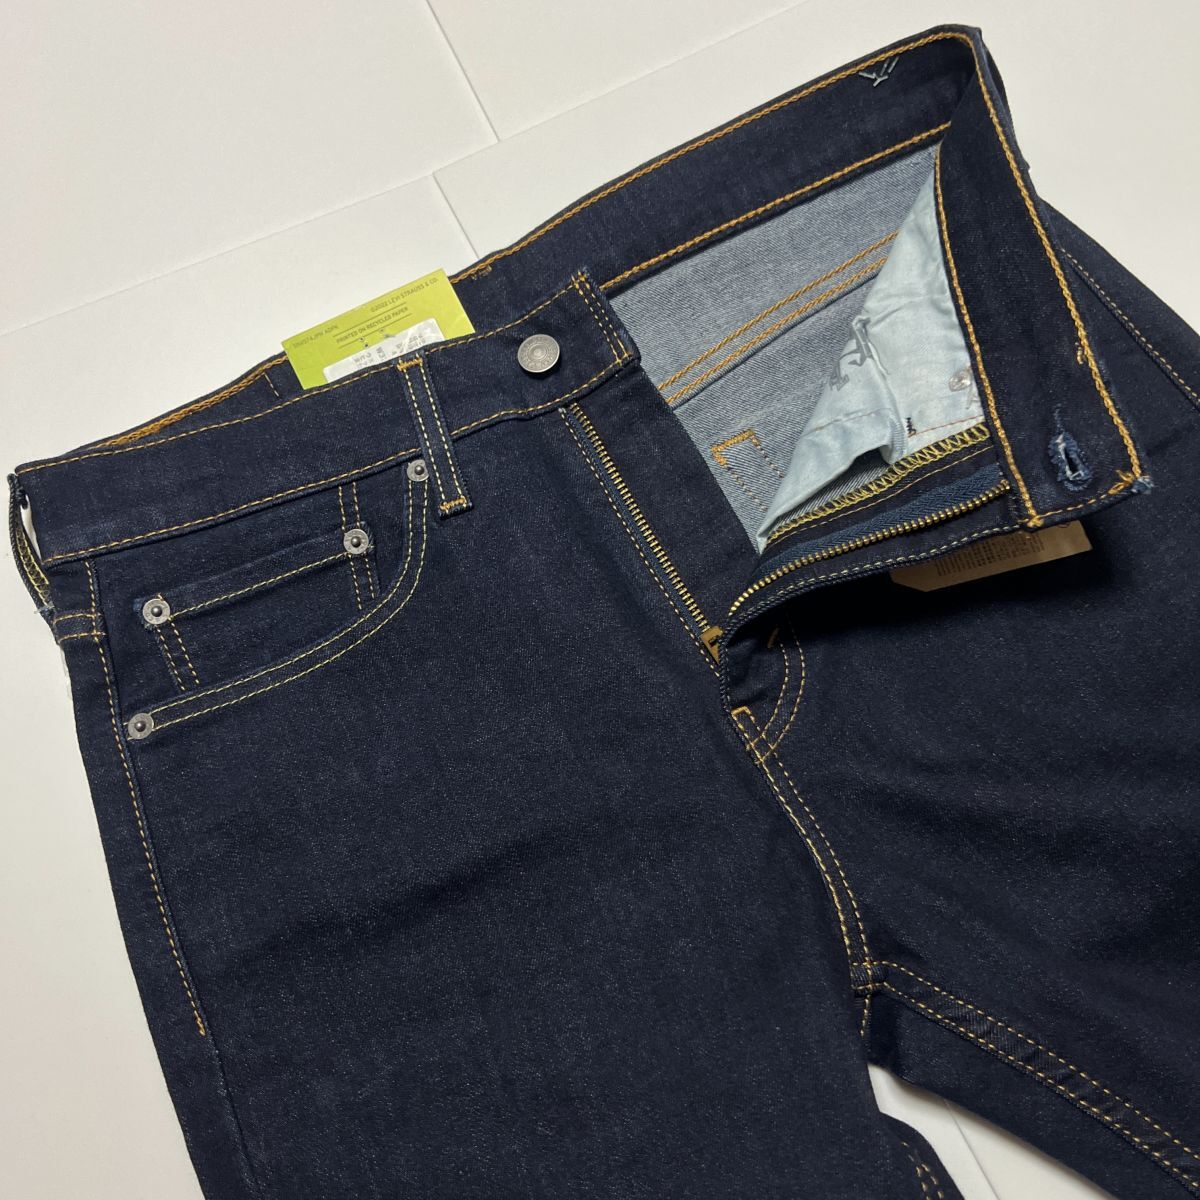 * Levi's Levis 510 new goods men's comfortable stretch casual skinny jeans Denim 33 -inch [05510-0692-33] four .*QWER*